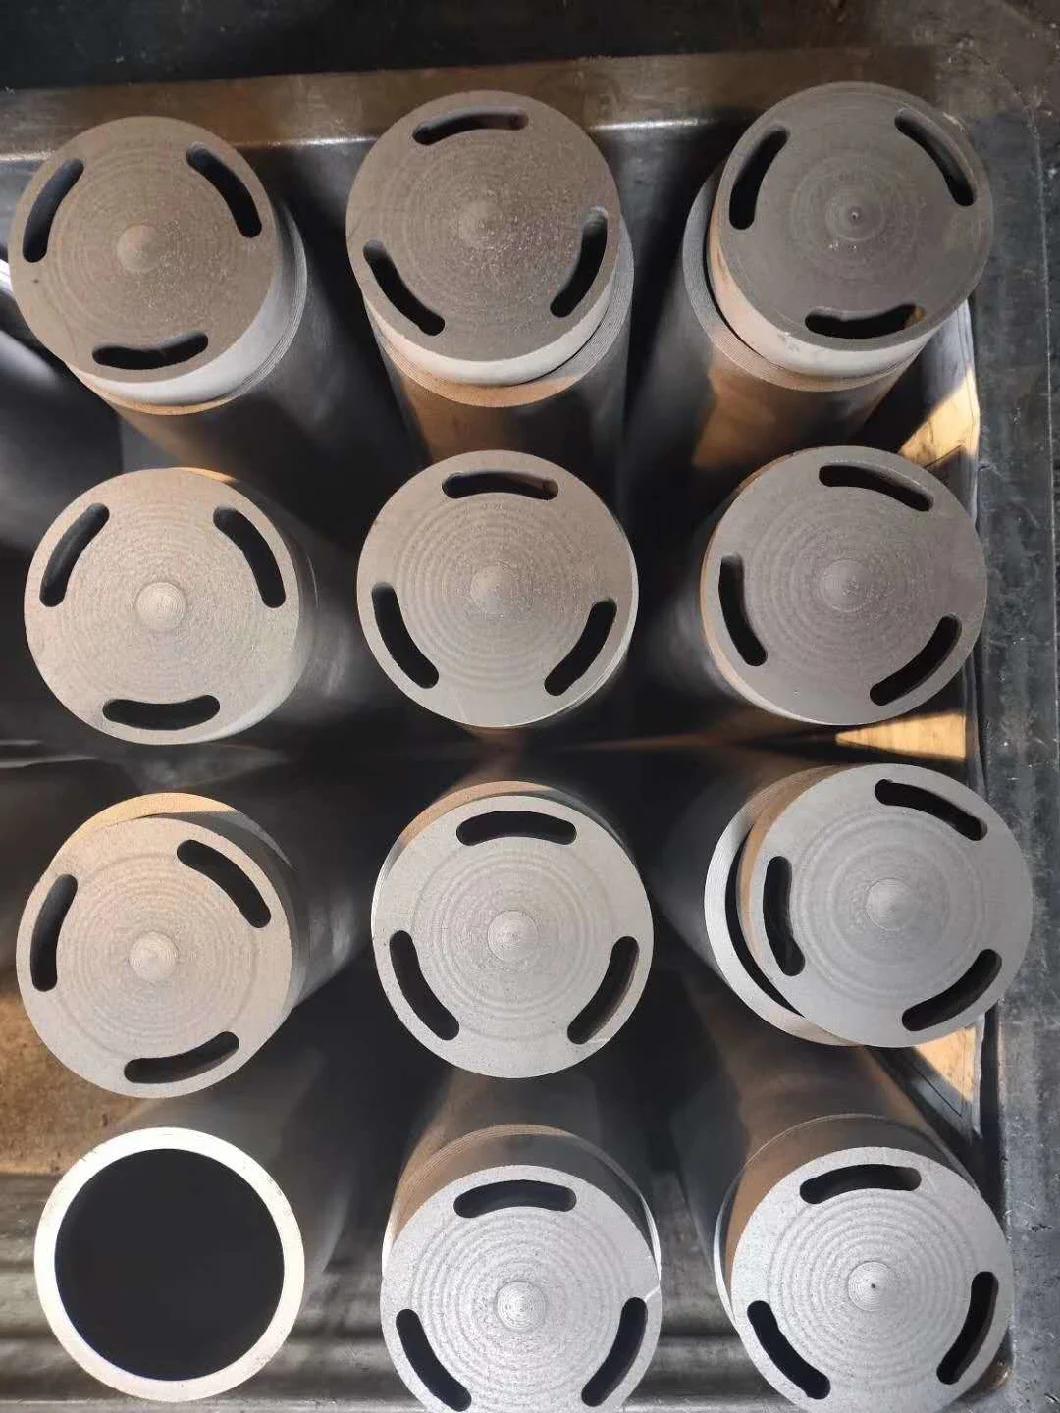 High Density Graphite Casting Melting Mold for Brass Bars, Rods, Tubes Products Production Line